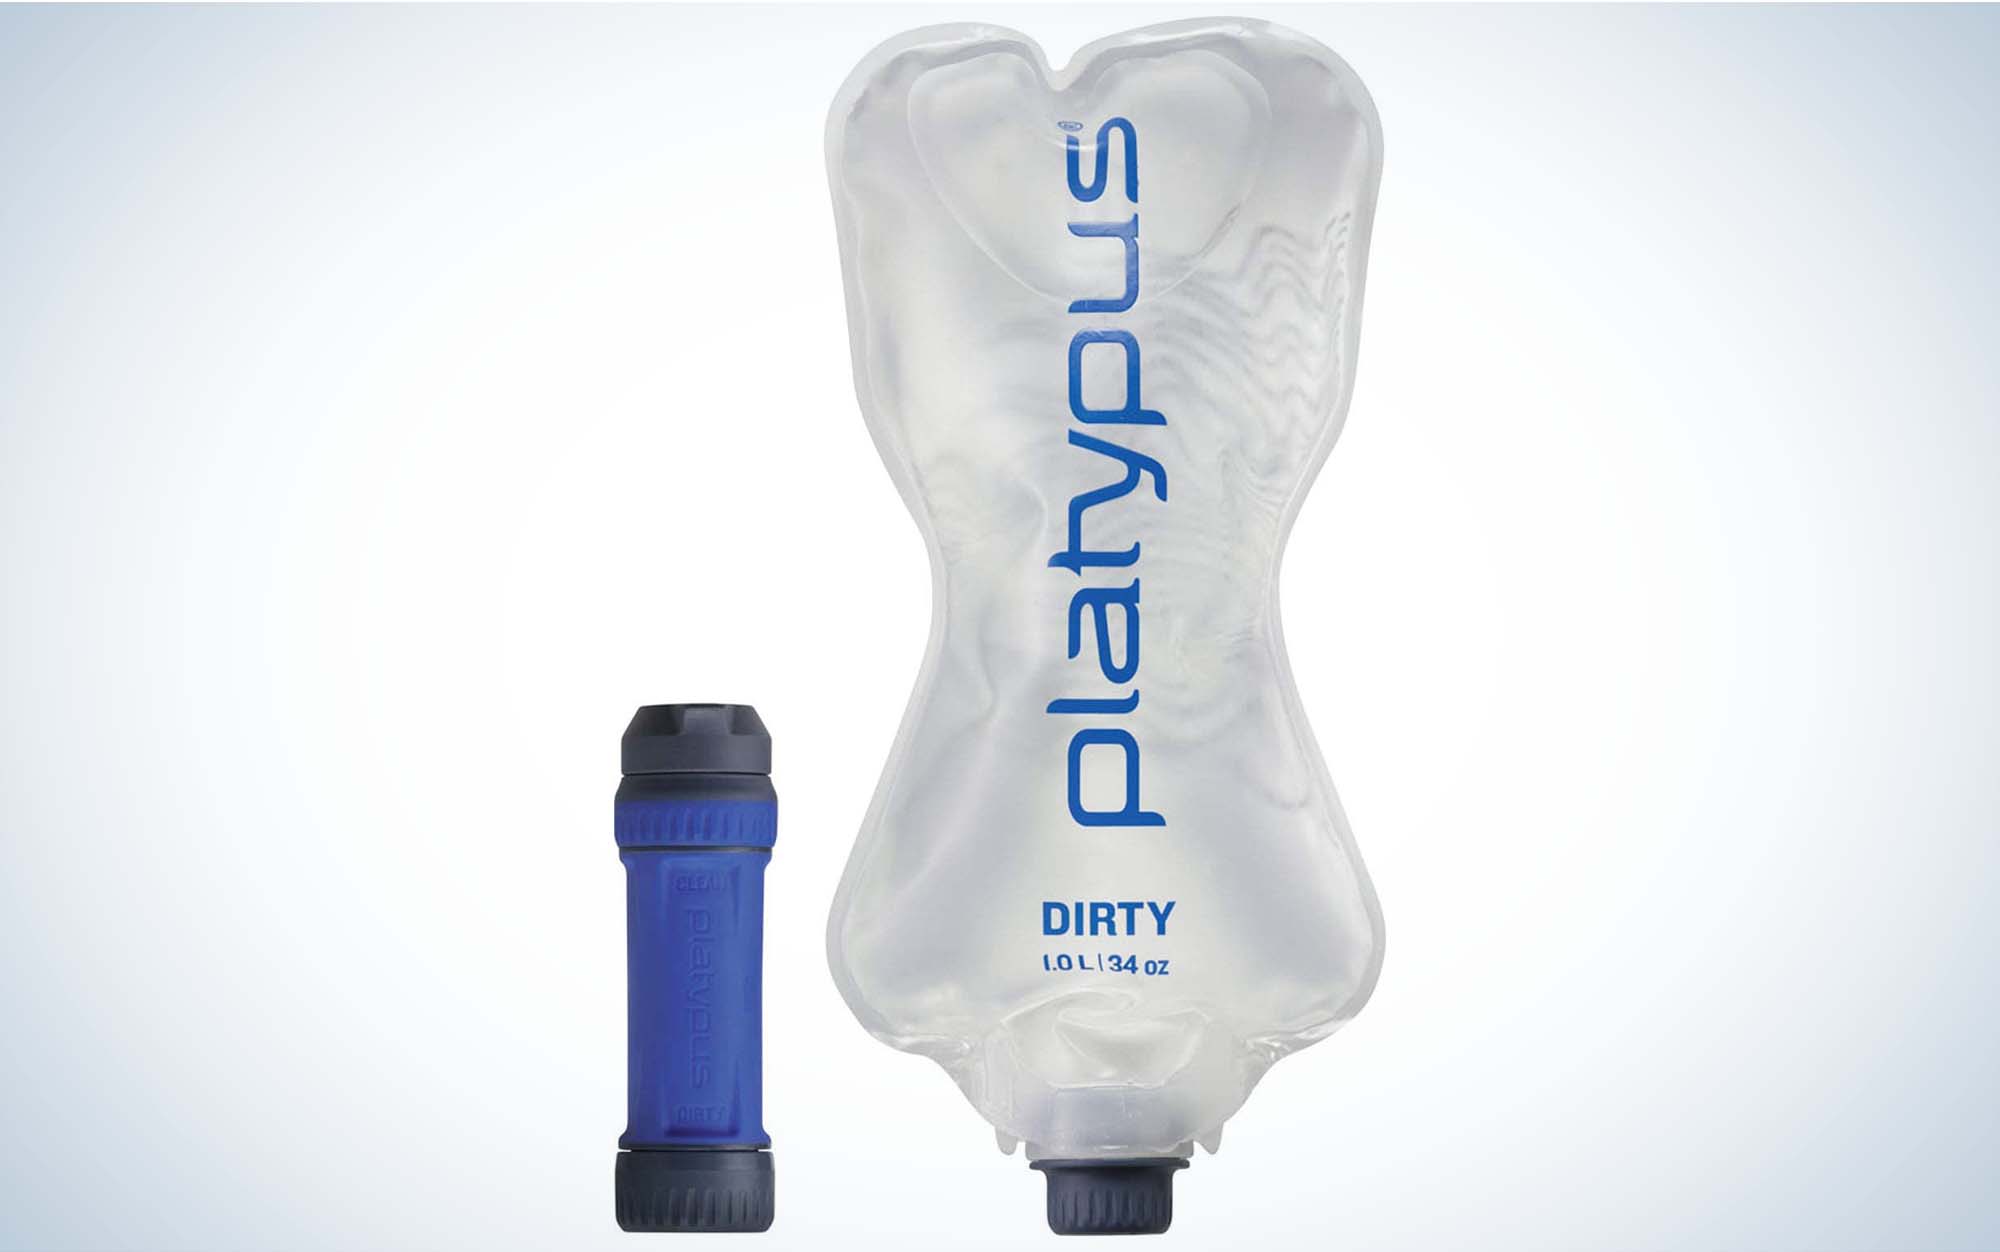 The Platypus QuickDraw is the fastest water filter.